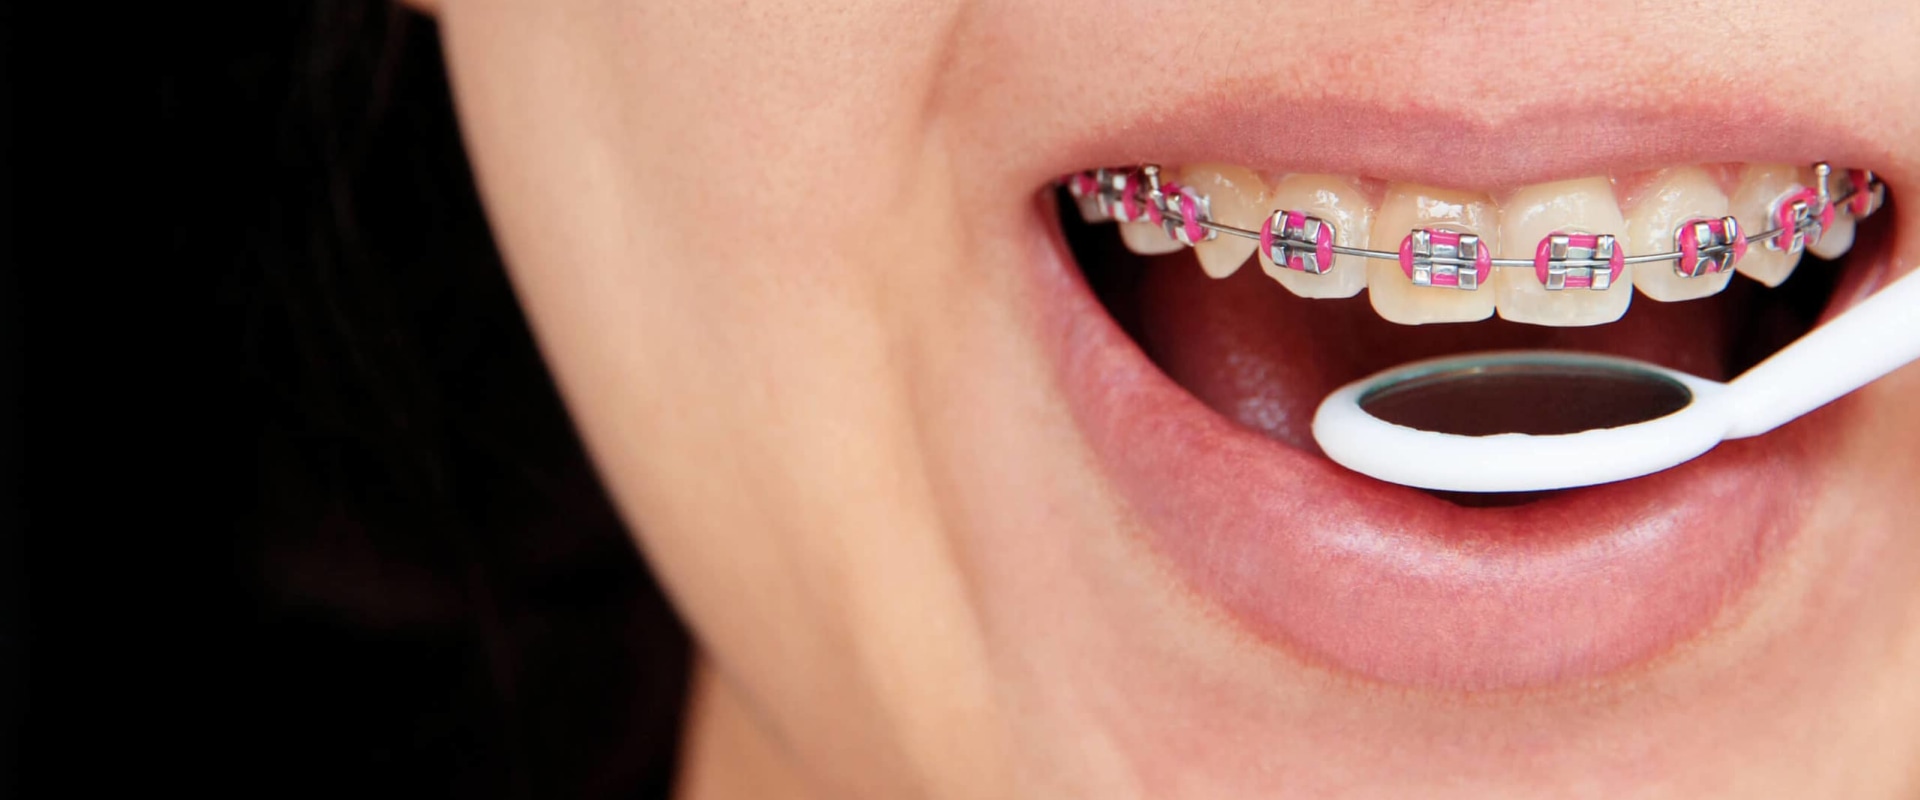 What are the types of orthodontic treatment?